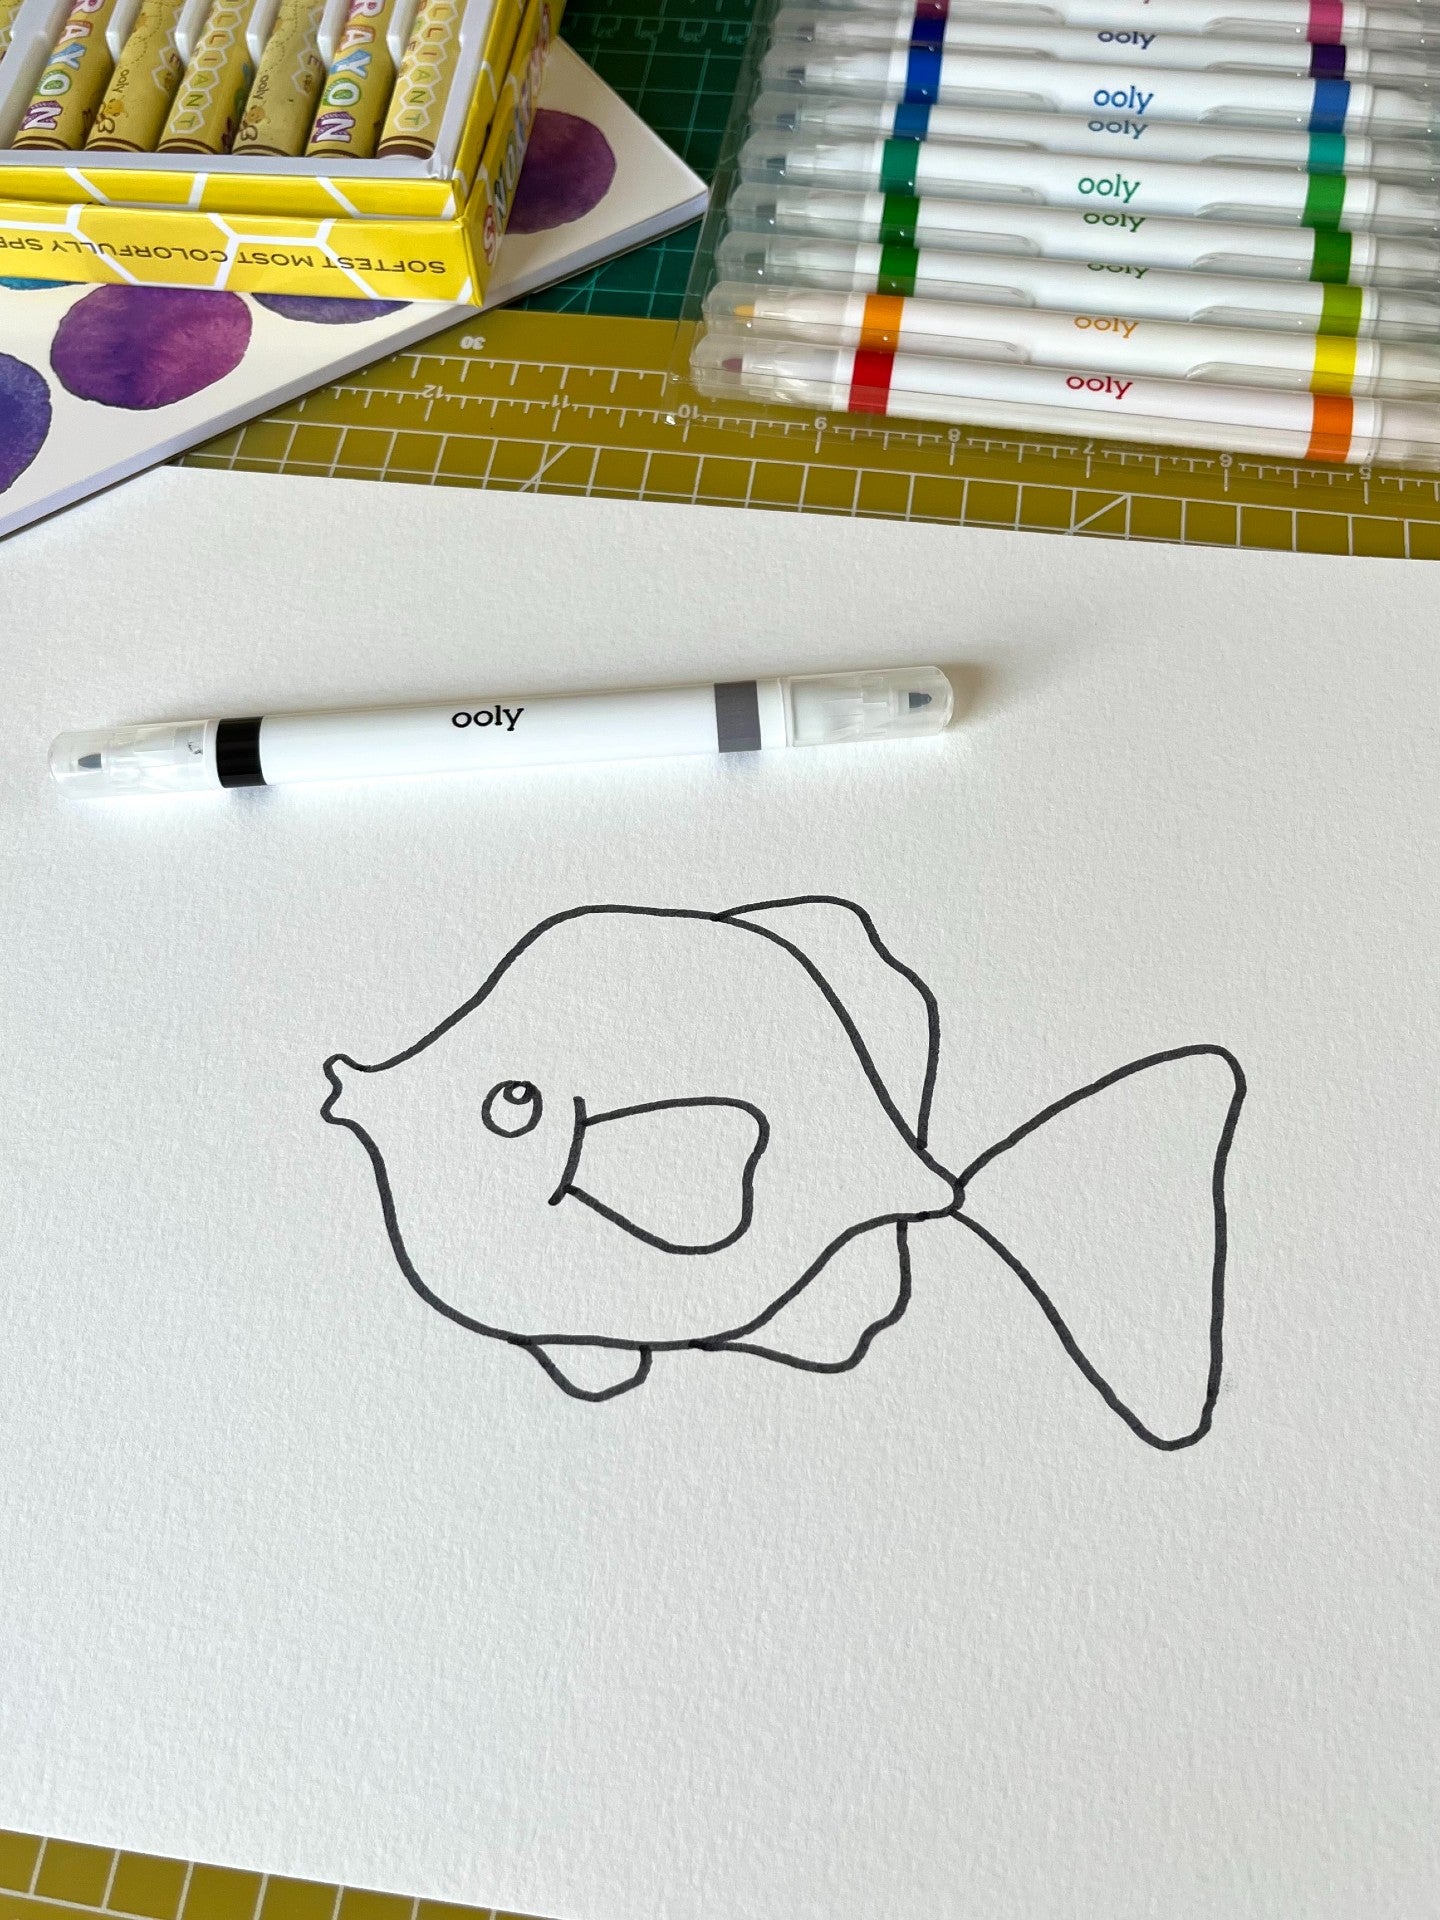 Outline of fish on white paper with black marker